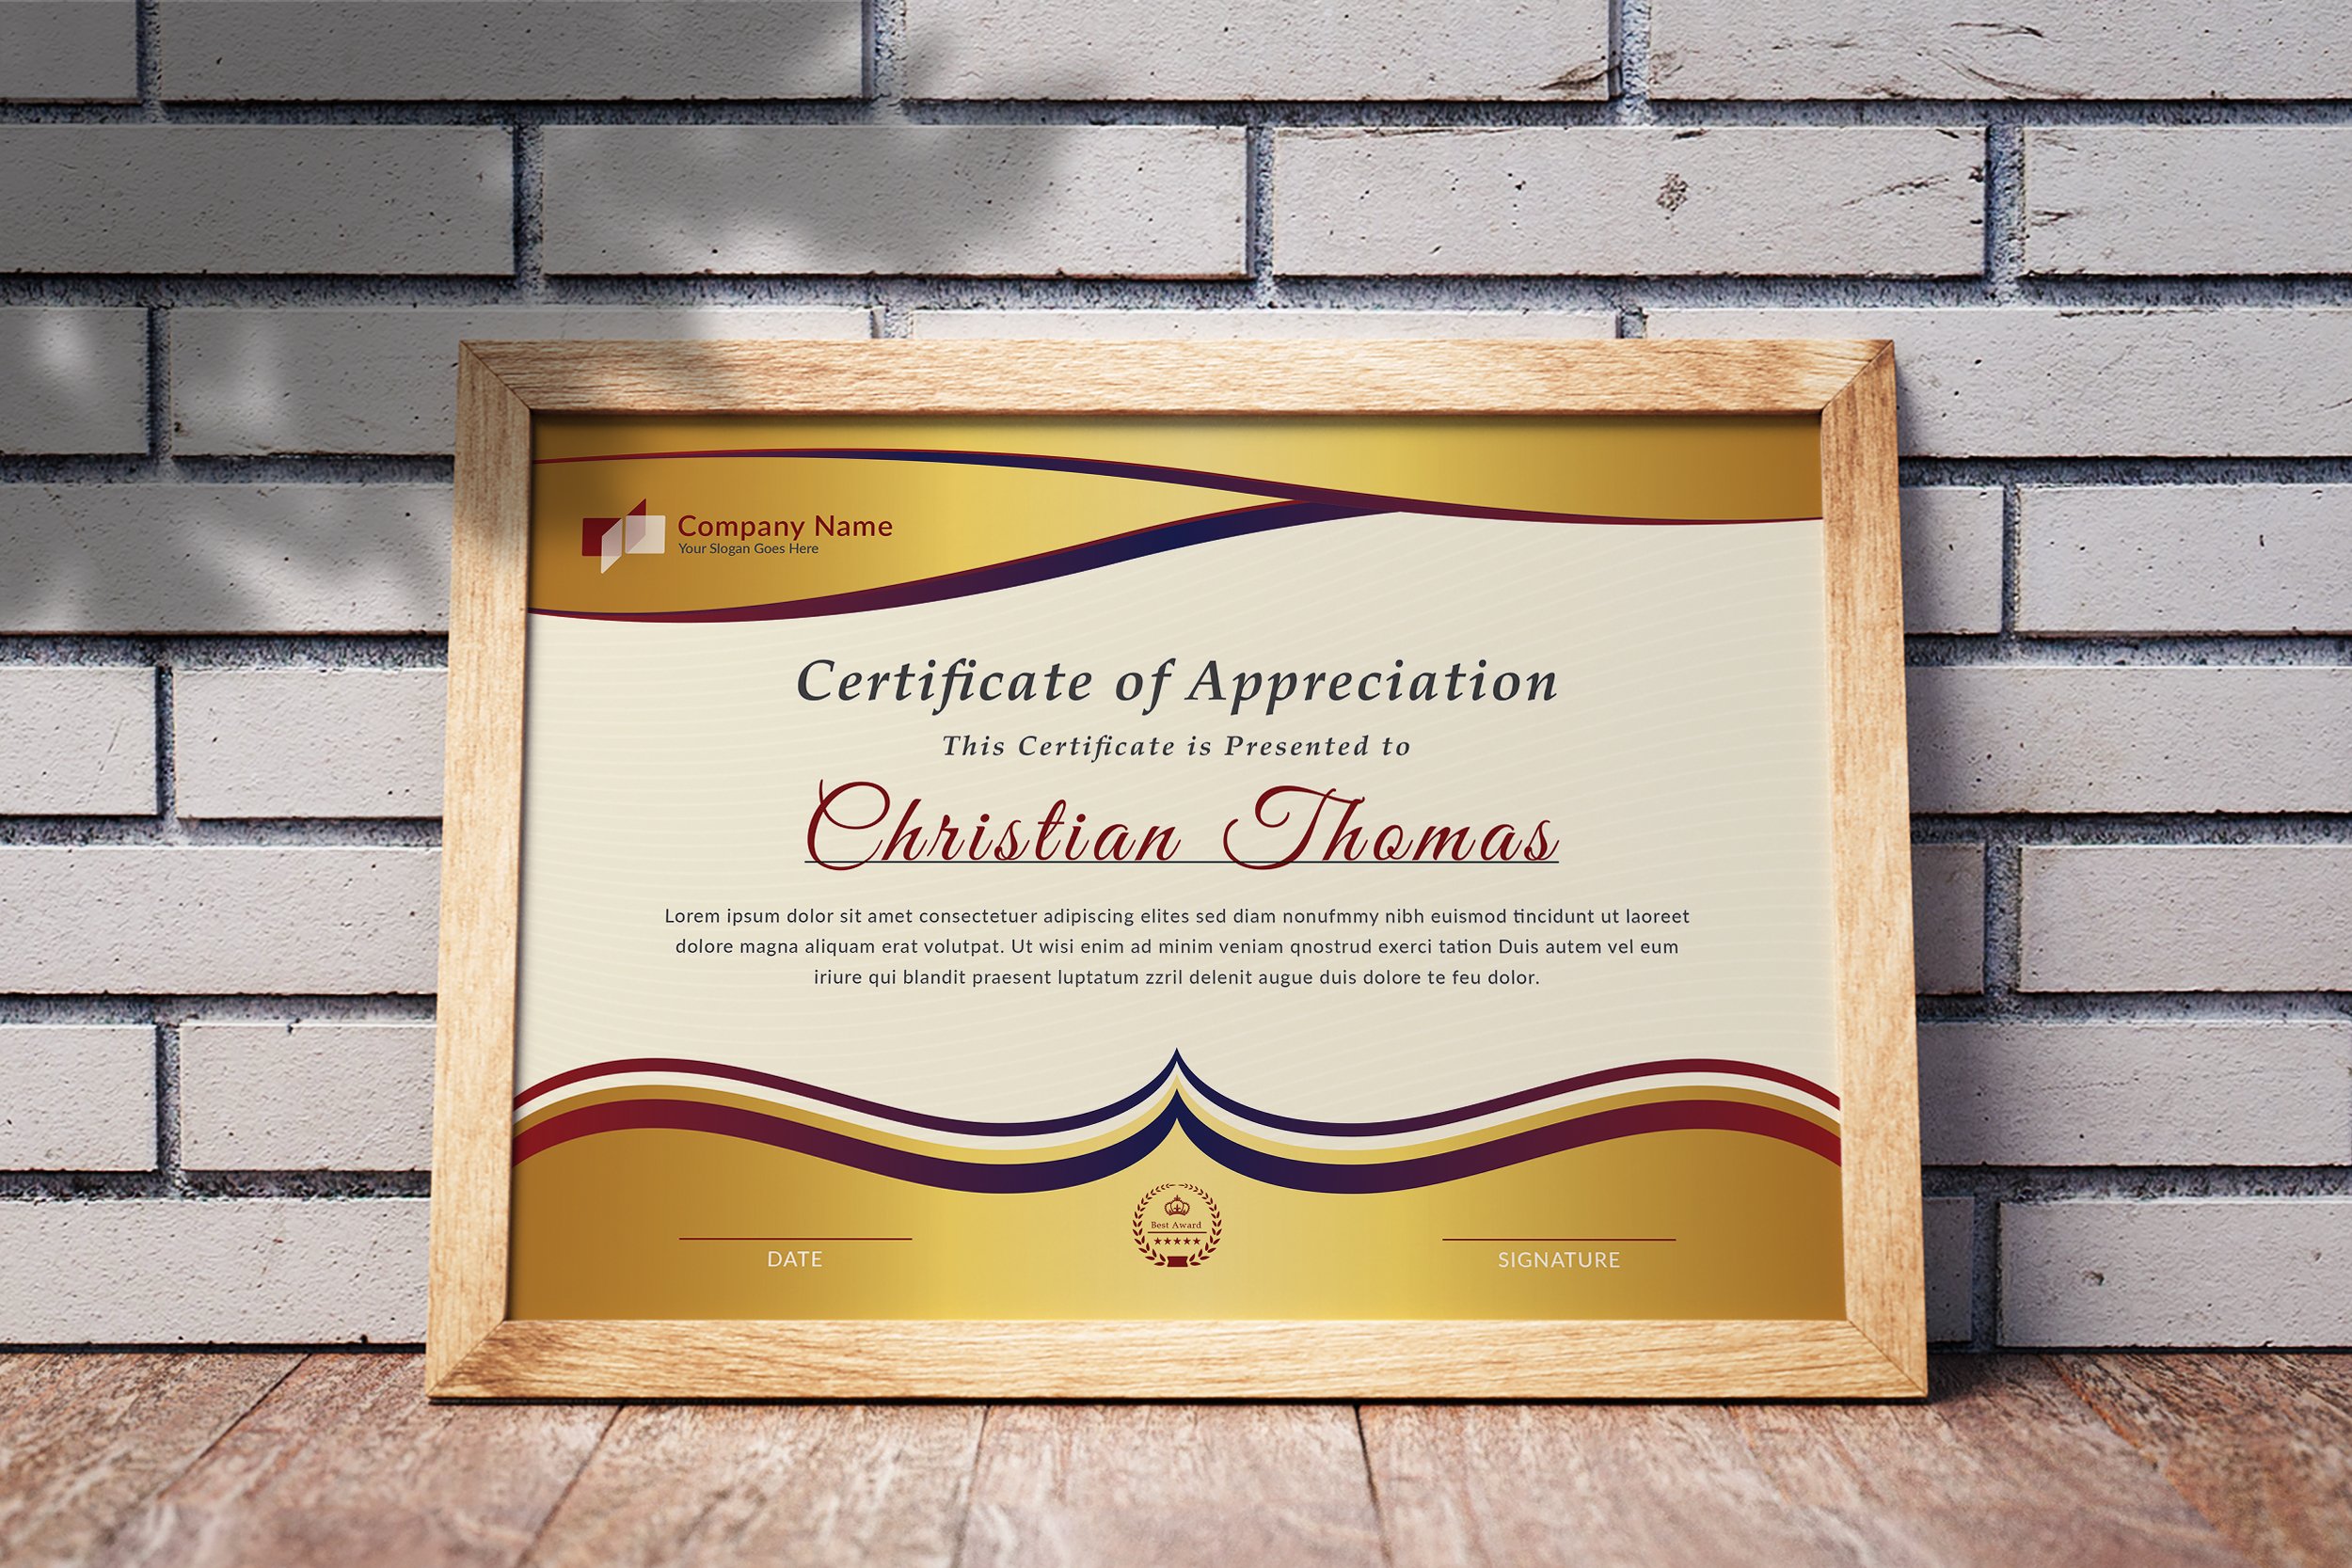 Golden Certificate Template cover image.